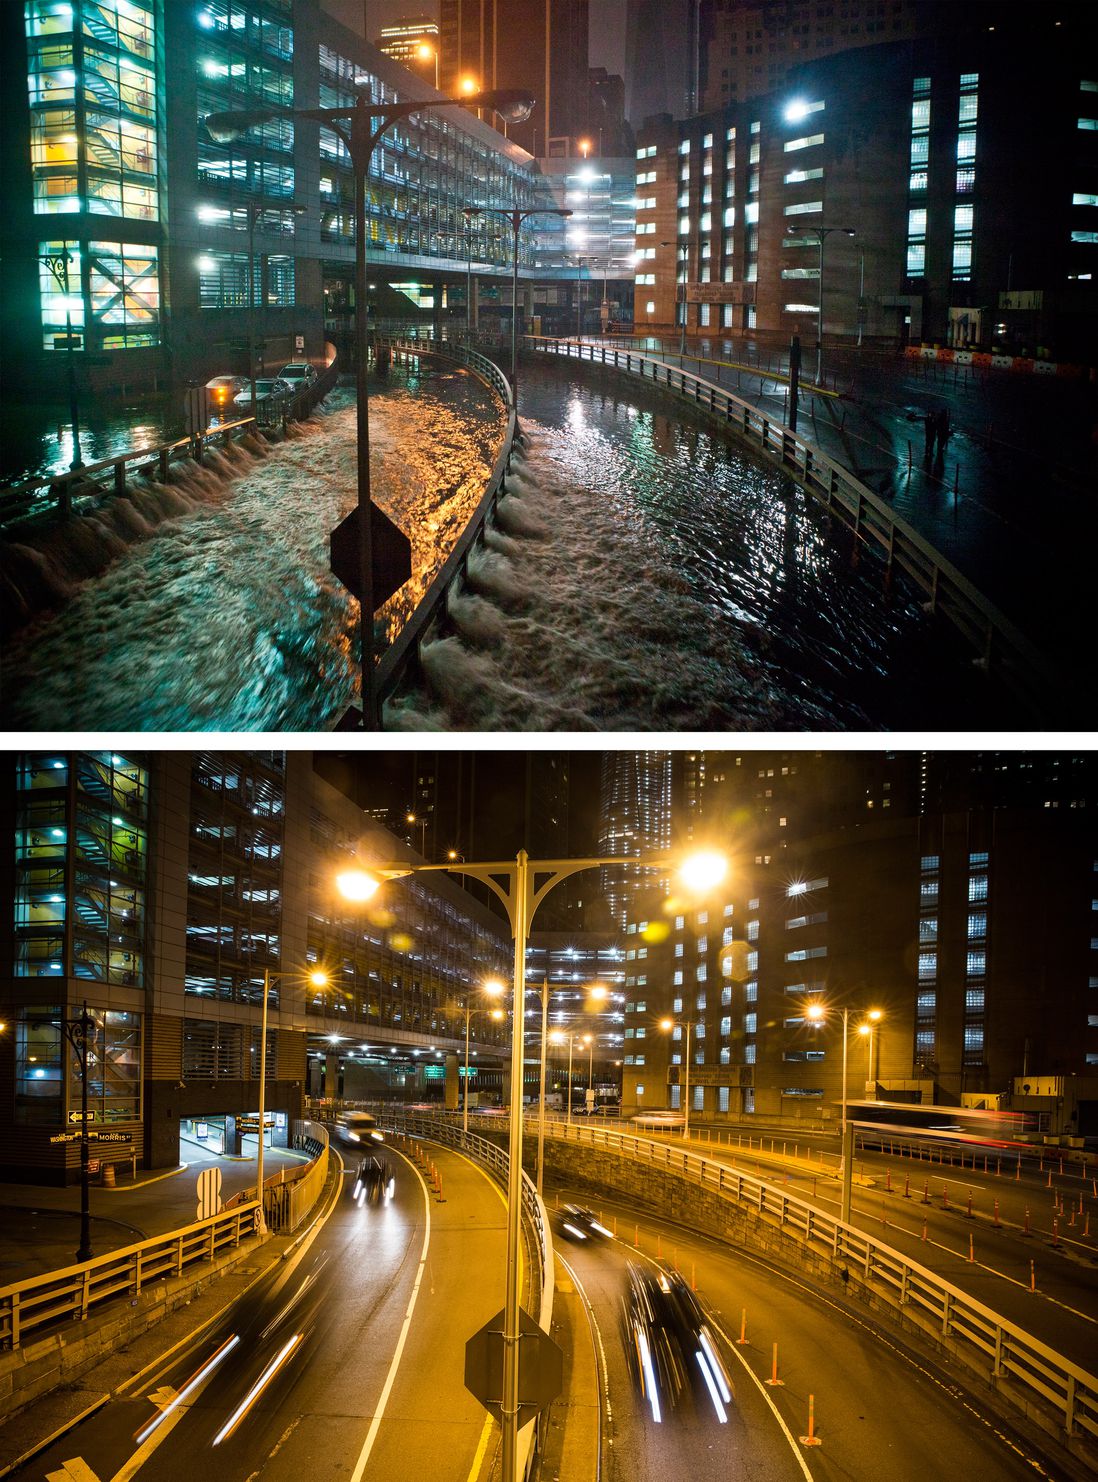 [Top] Rising water caused by Superstorm Sandy rushes into the Carey Tunnel (previously known as the Brooklyn Battery Tunnel) October 29, 2012 in New York City. [Bottom] Cars use the Carey Tunnel October 22, 2013 in New York City.